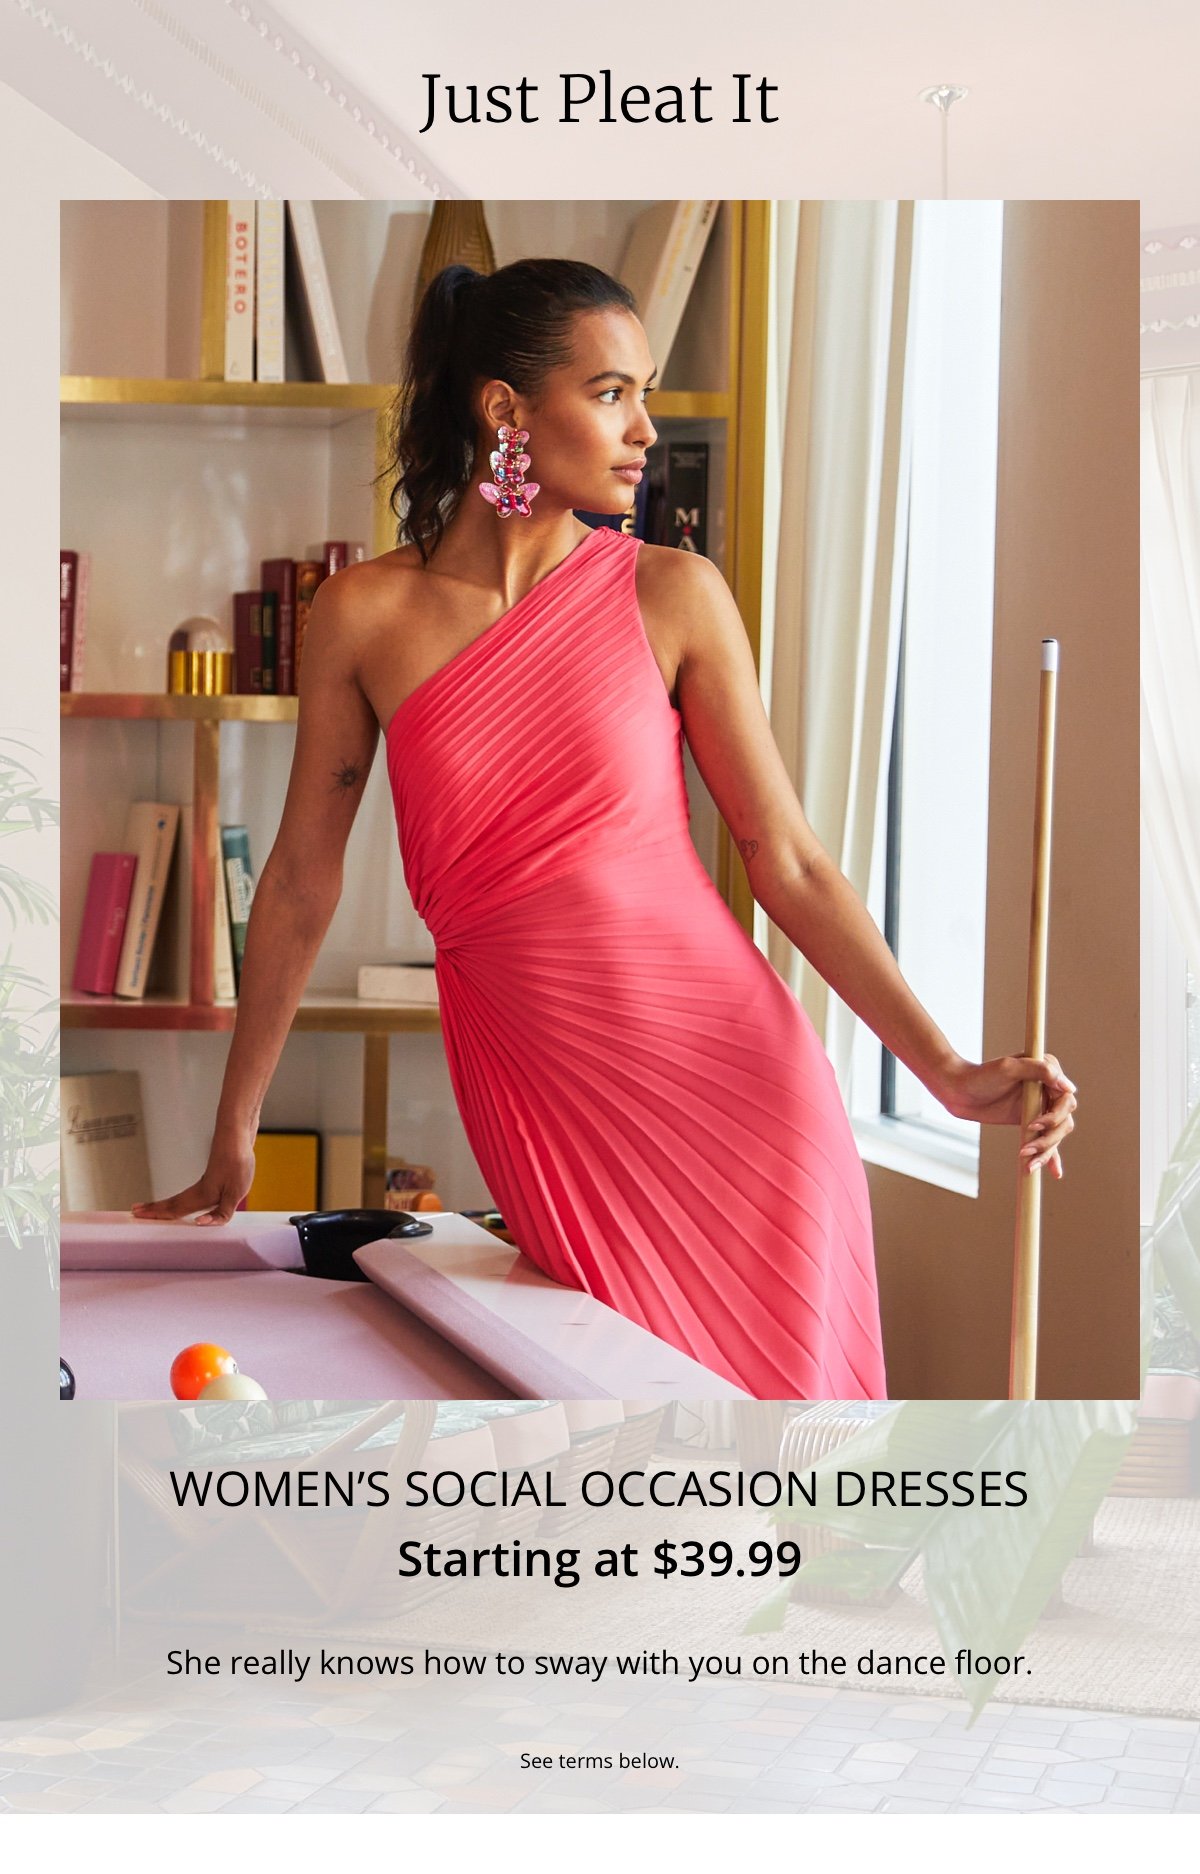 Just Pleat It|Women’s Social Occasion Dresses|Starting at \\$39.99|She really knows how to sway with you on the dance floor.|See terms below.